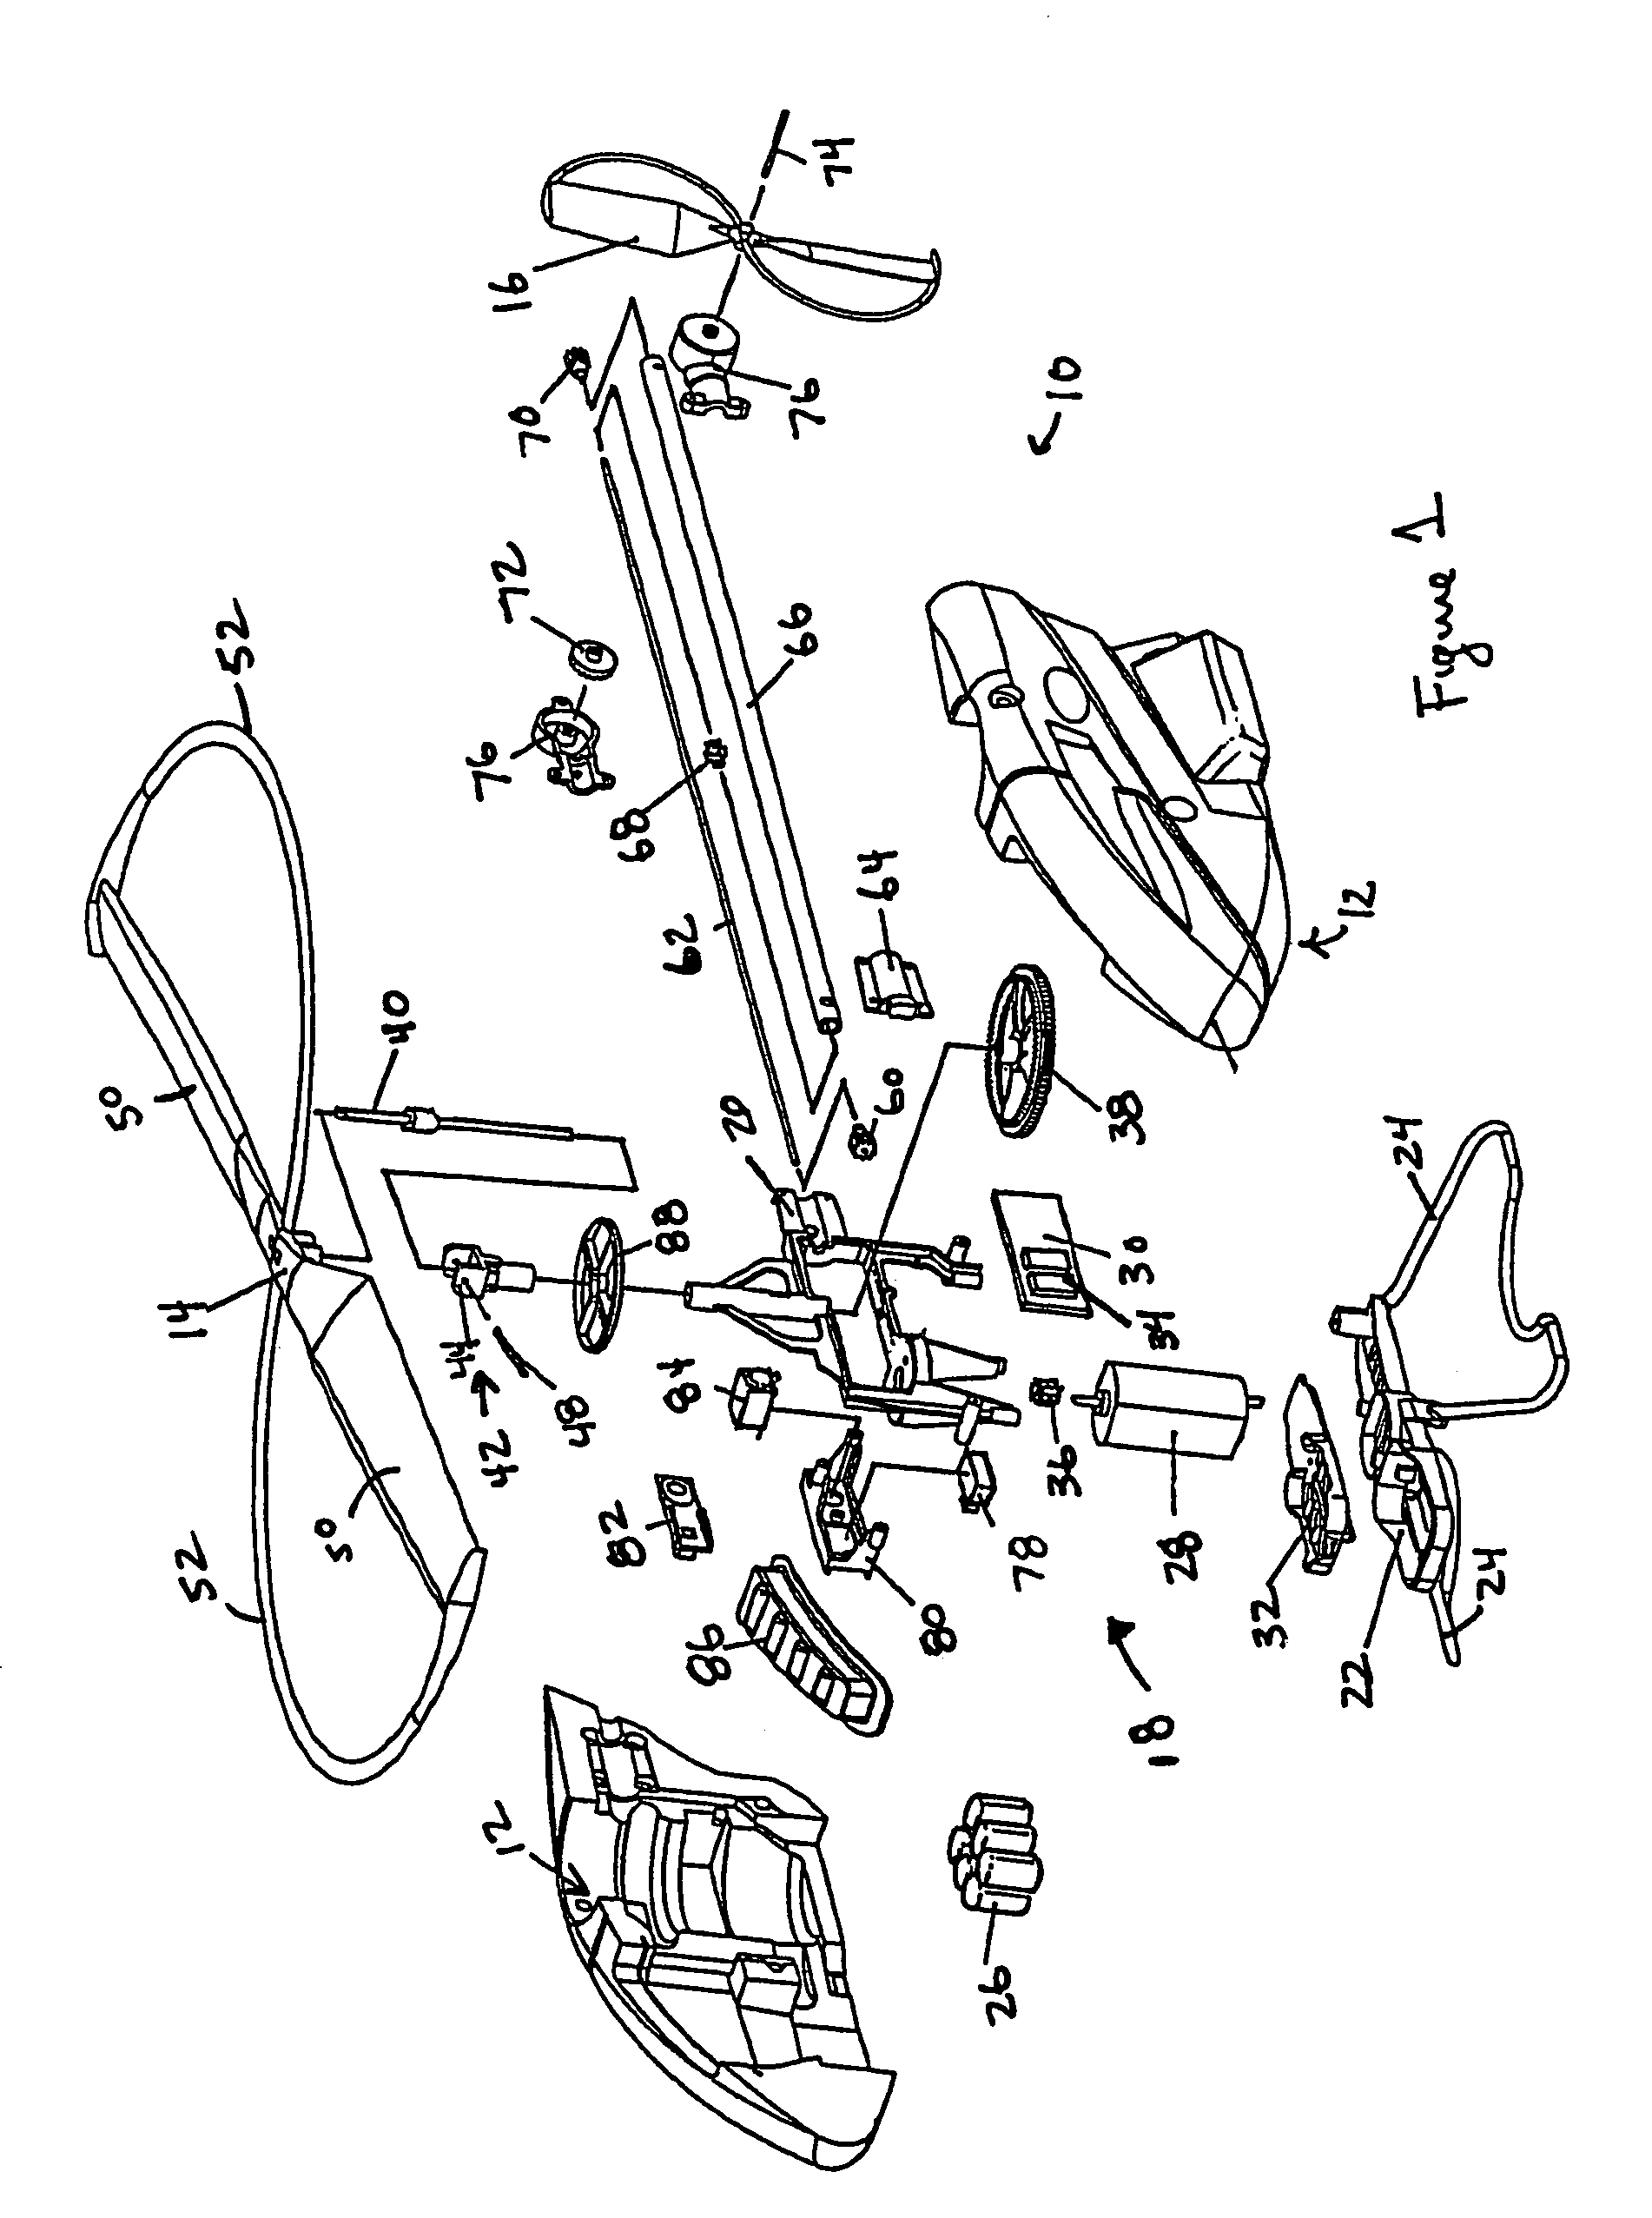 Propellers and propeller related vehicles